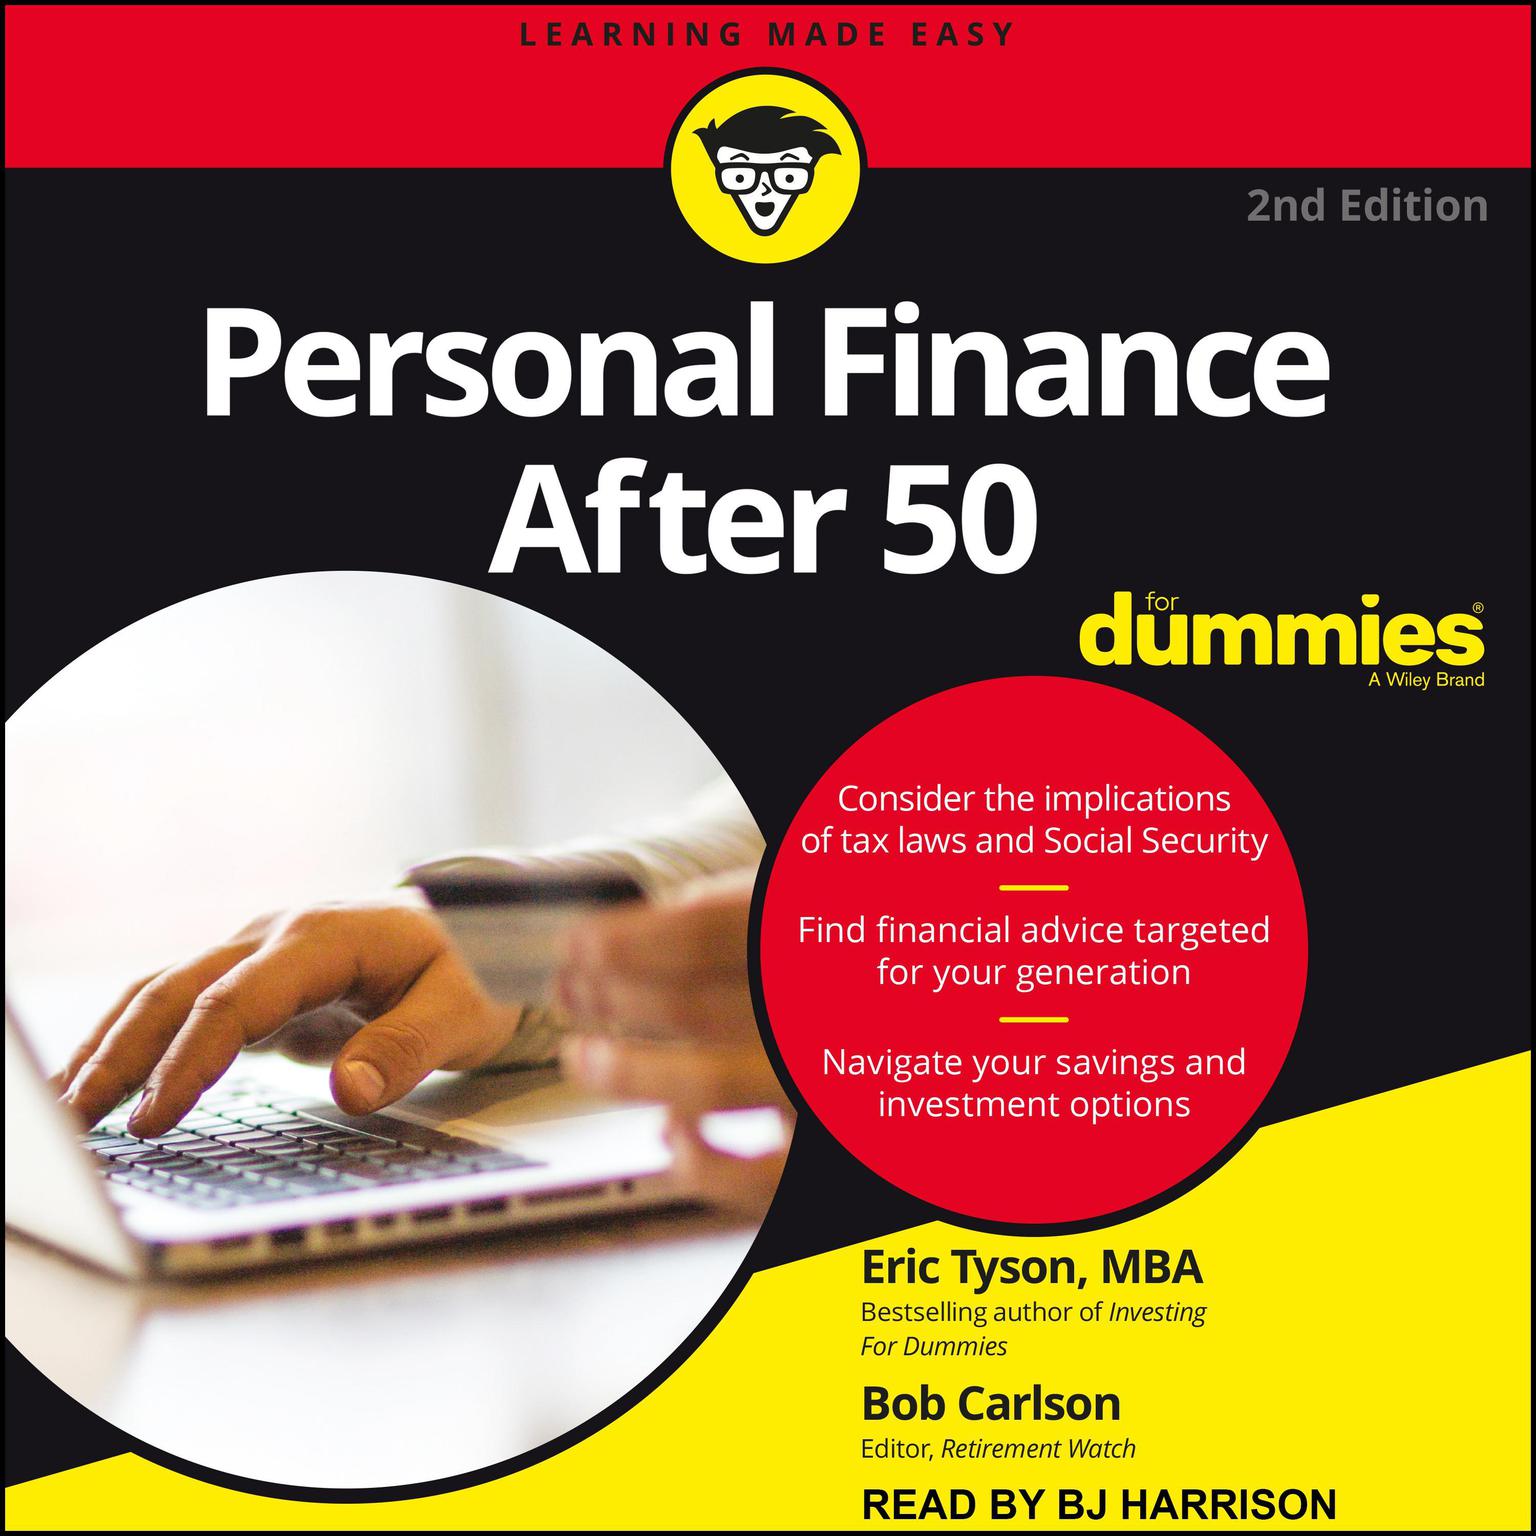 Personal Finance After 50 For Dummies: 2nd Edition Audiobook, by Eric Tyson